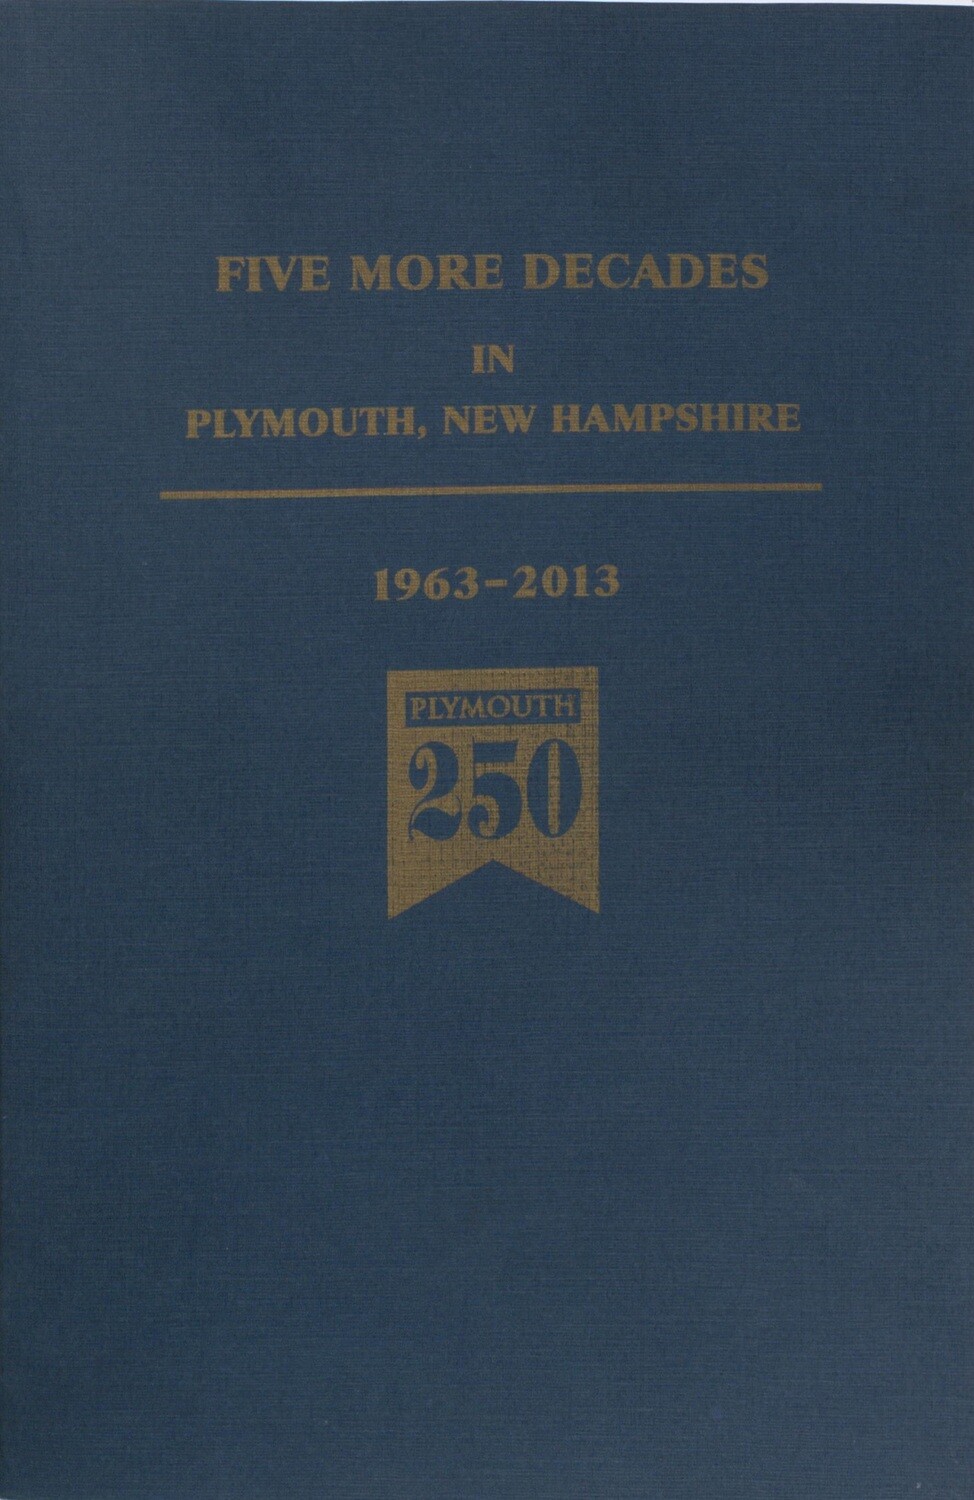 Five More Decades in Plymouth, New Hampshire 1963-2013